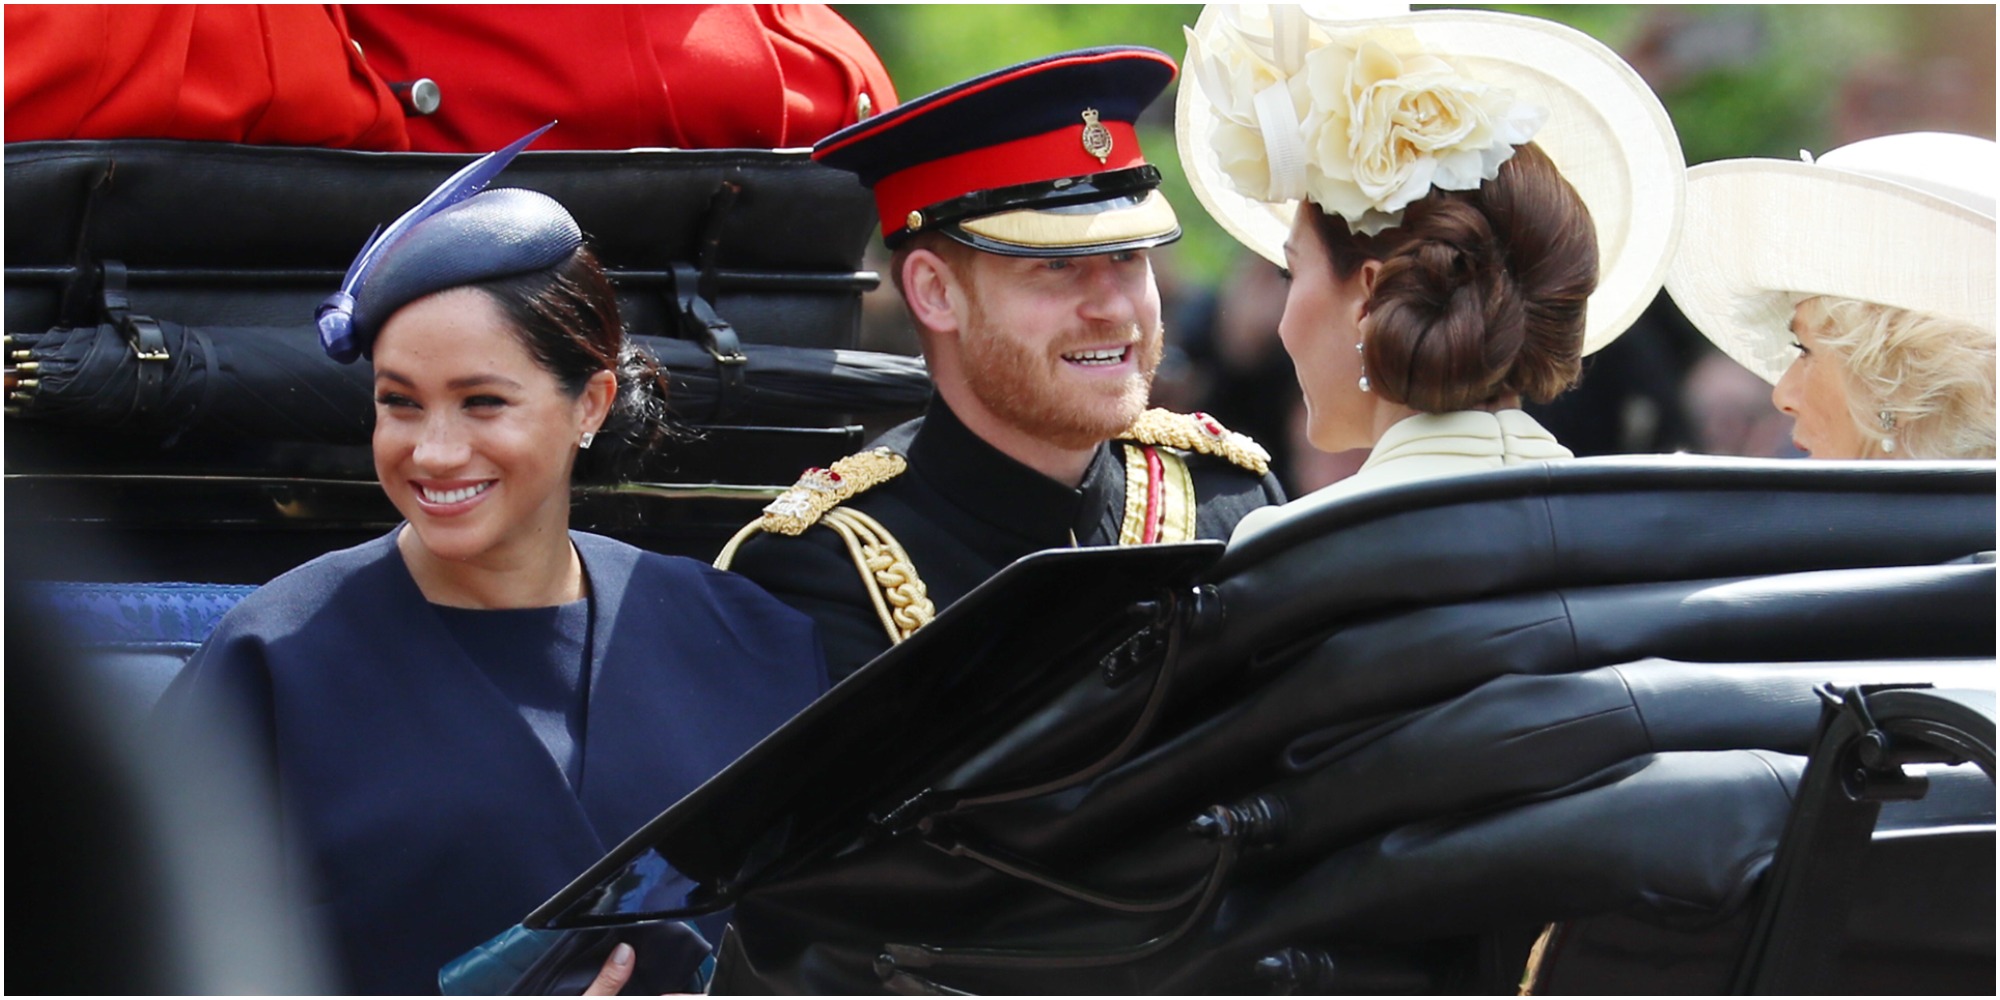 Prince Harry, Meghan Markle, Kate Middleton, and Camilla Parker Bowles ride in a carriage for Trooping the Colour.